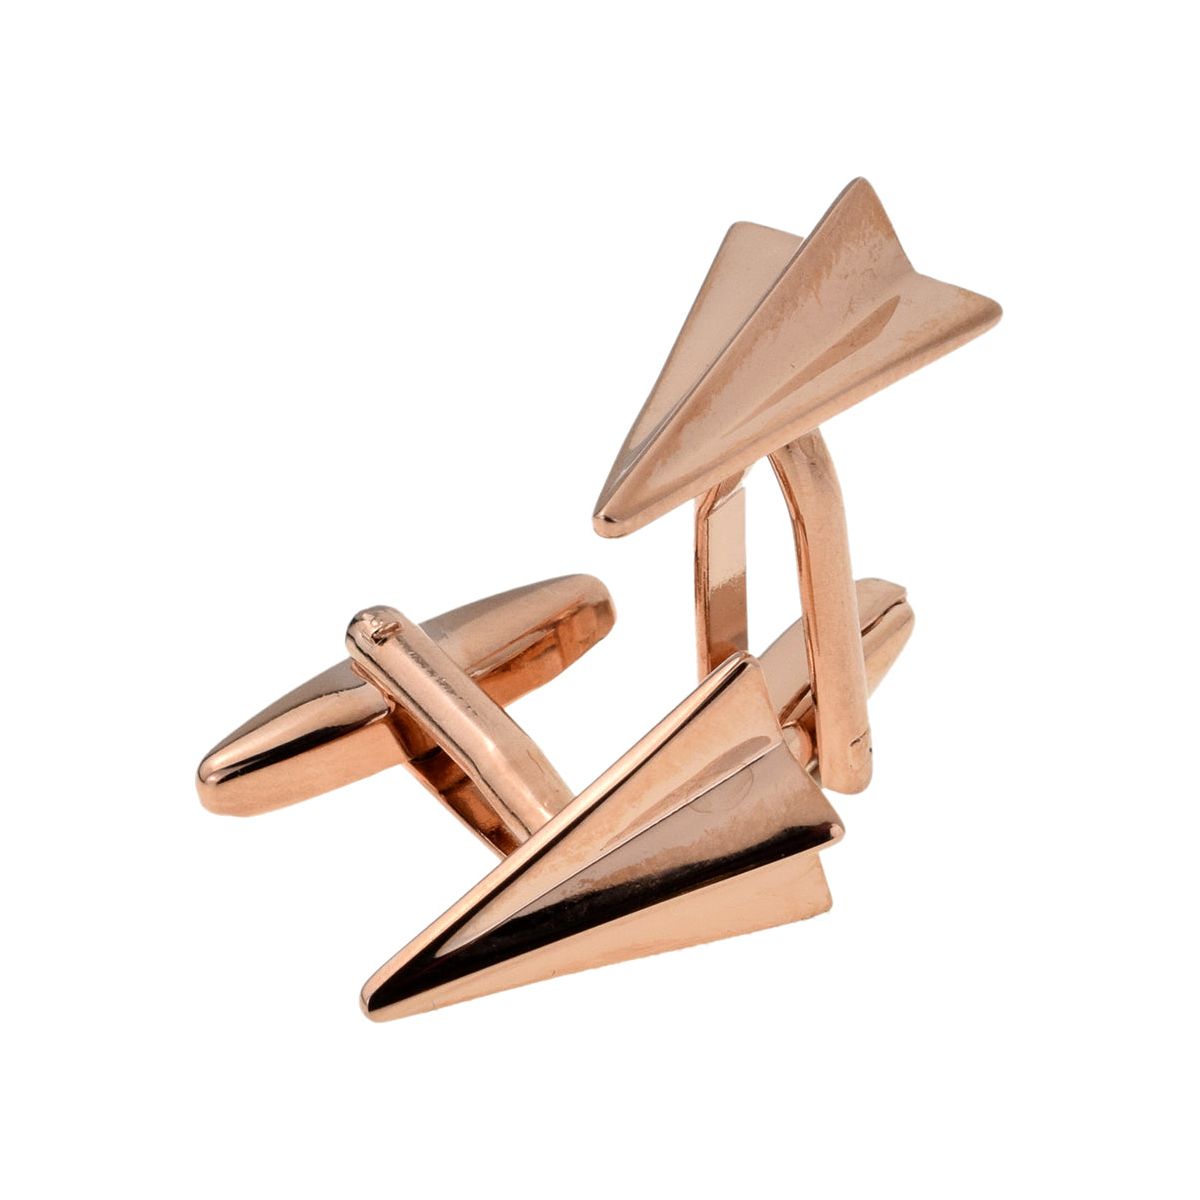 Rose Gold Plated Paper Plane Cufflinks - Ashton and Finch